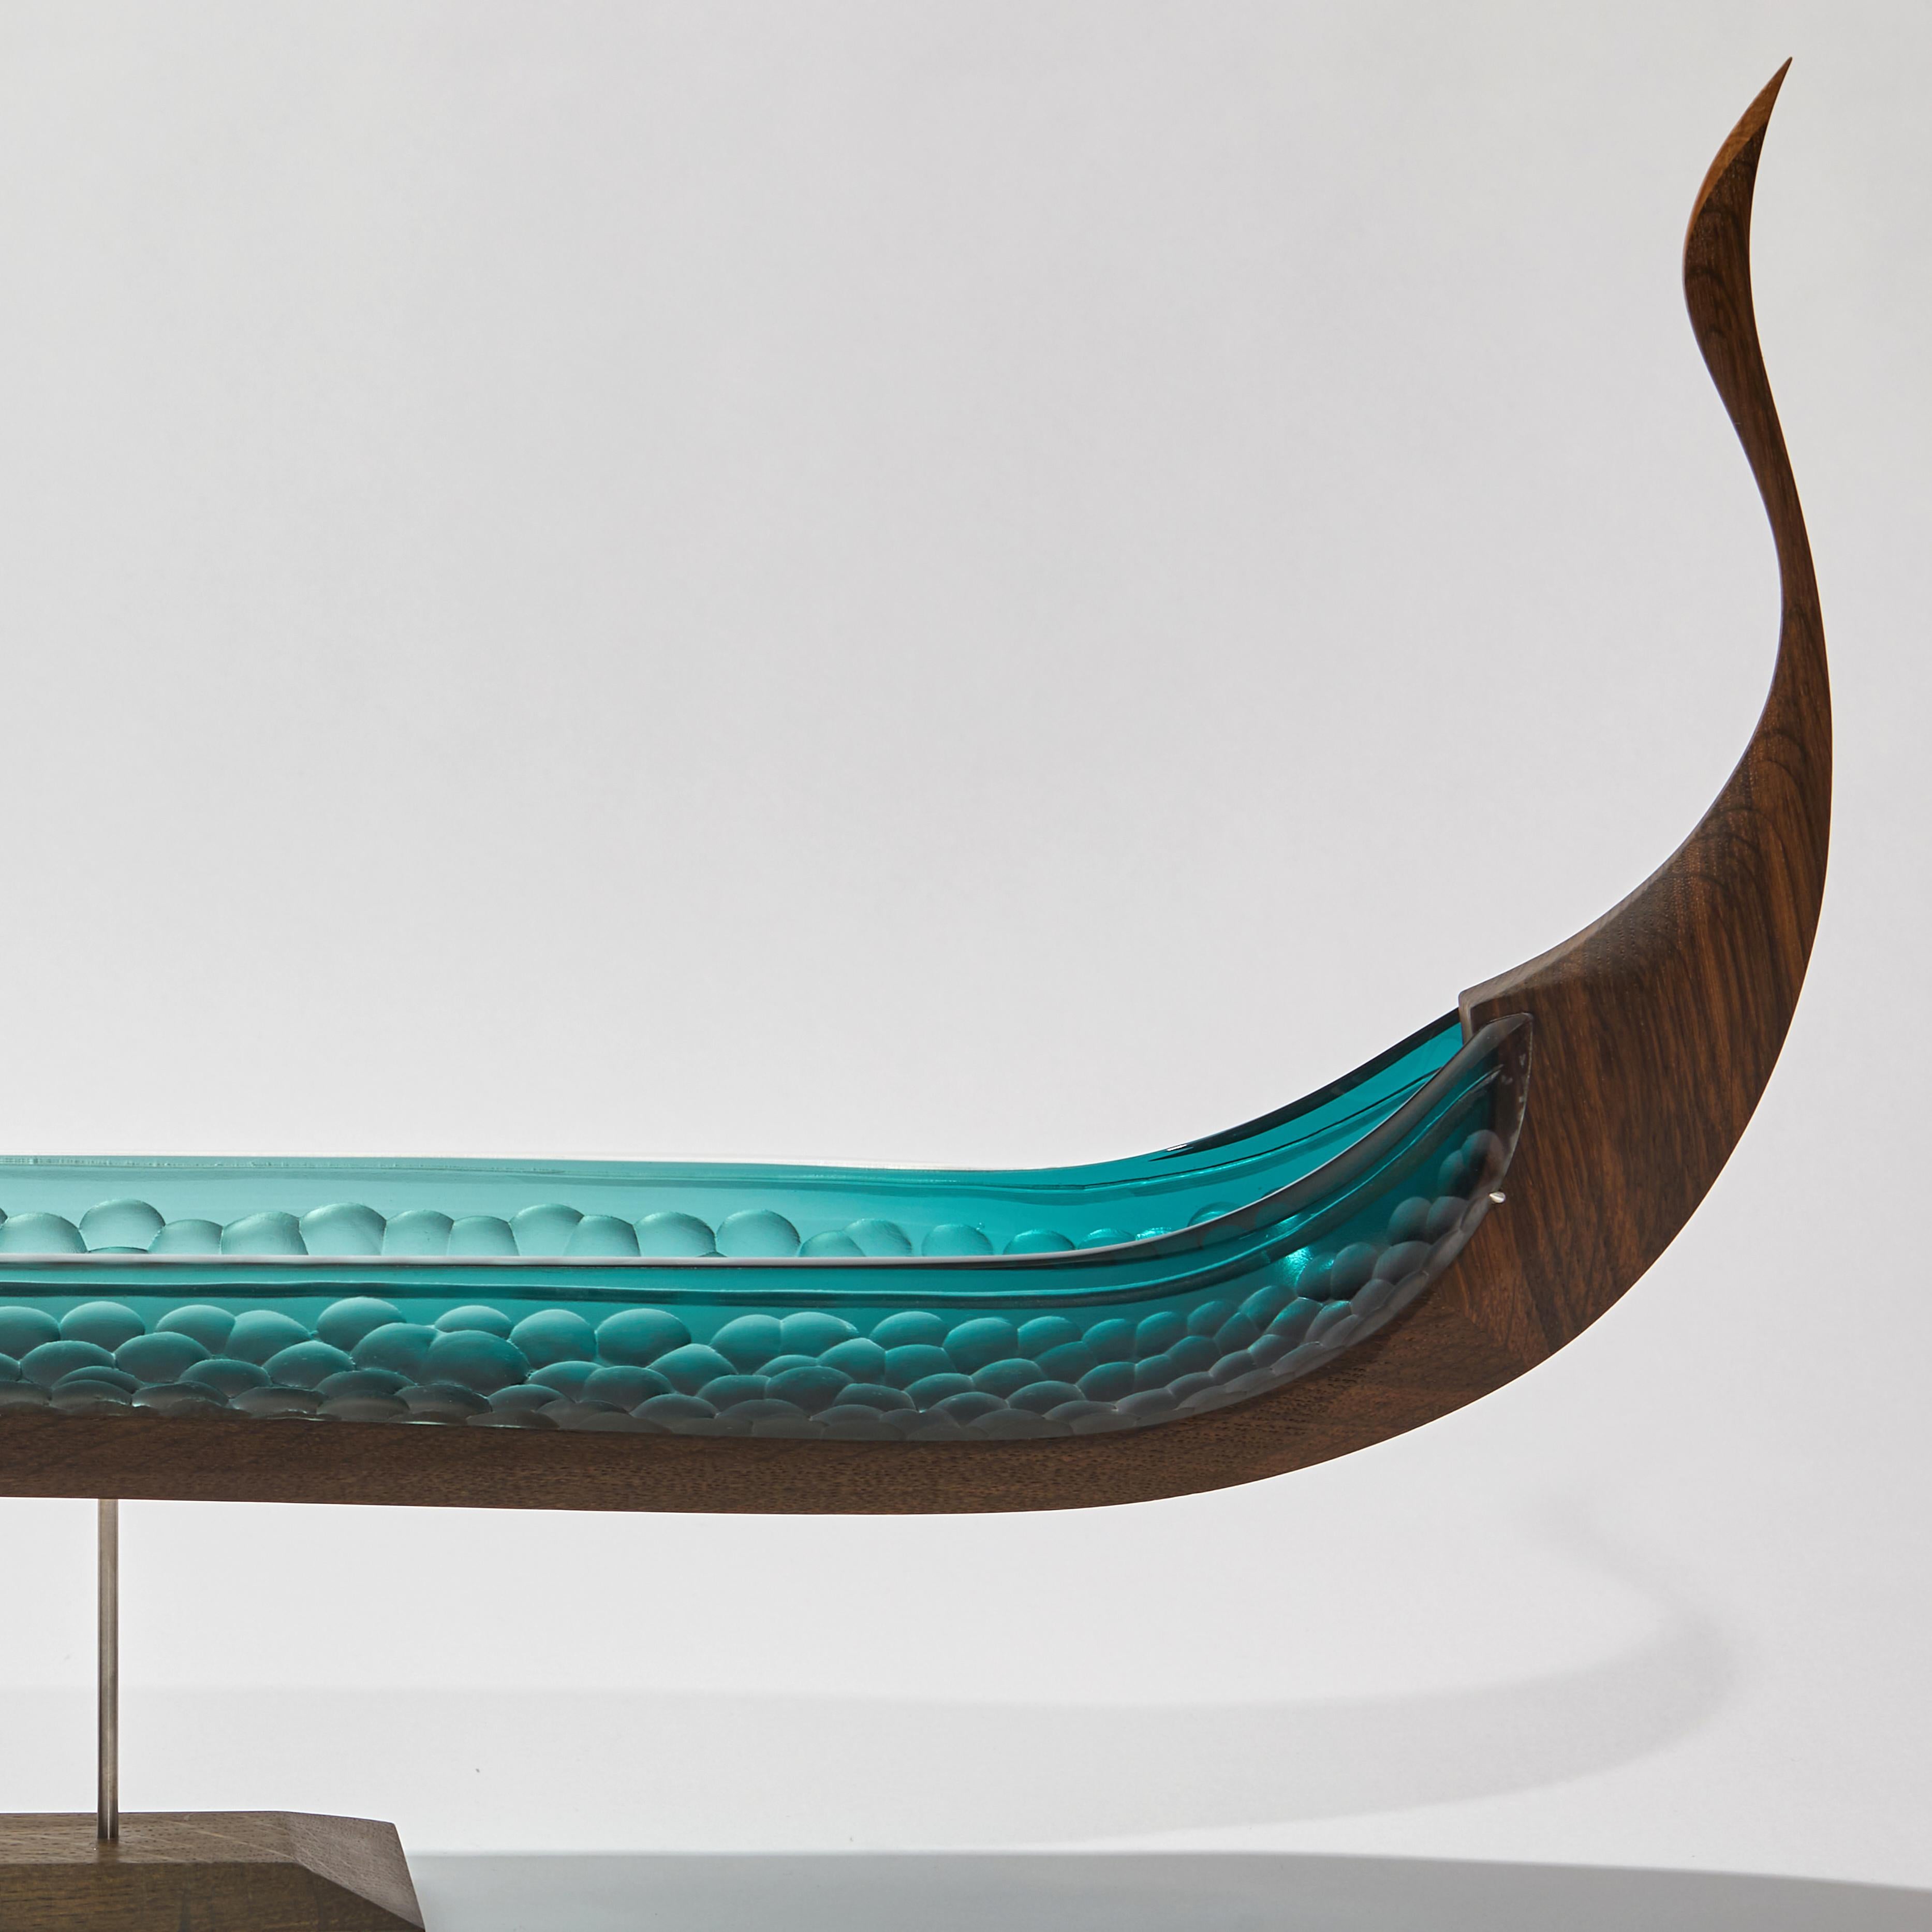 Hand-Crafted  Konge, a Unique Sculpture in Jade Glass & Oak by Backhaus & Brown and Egeværk